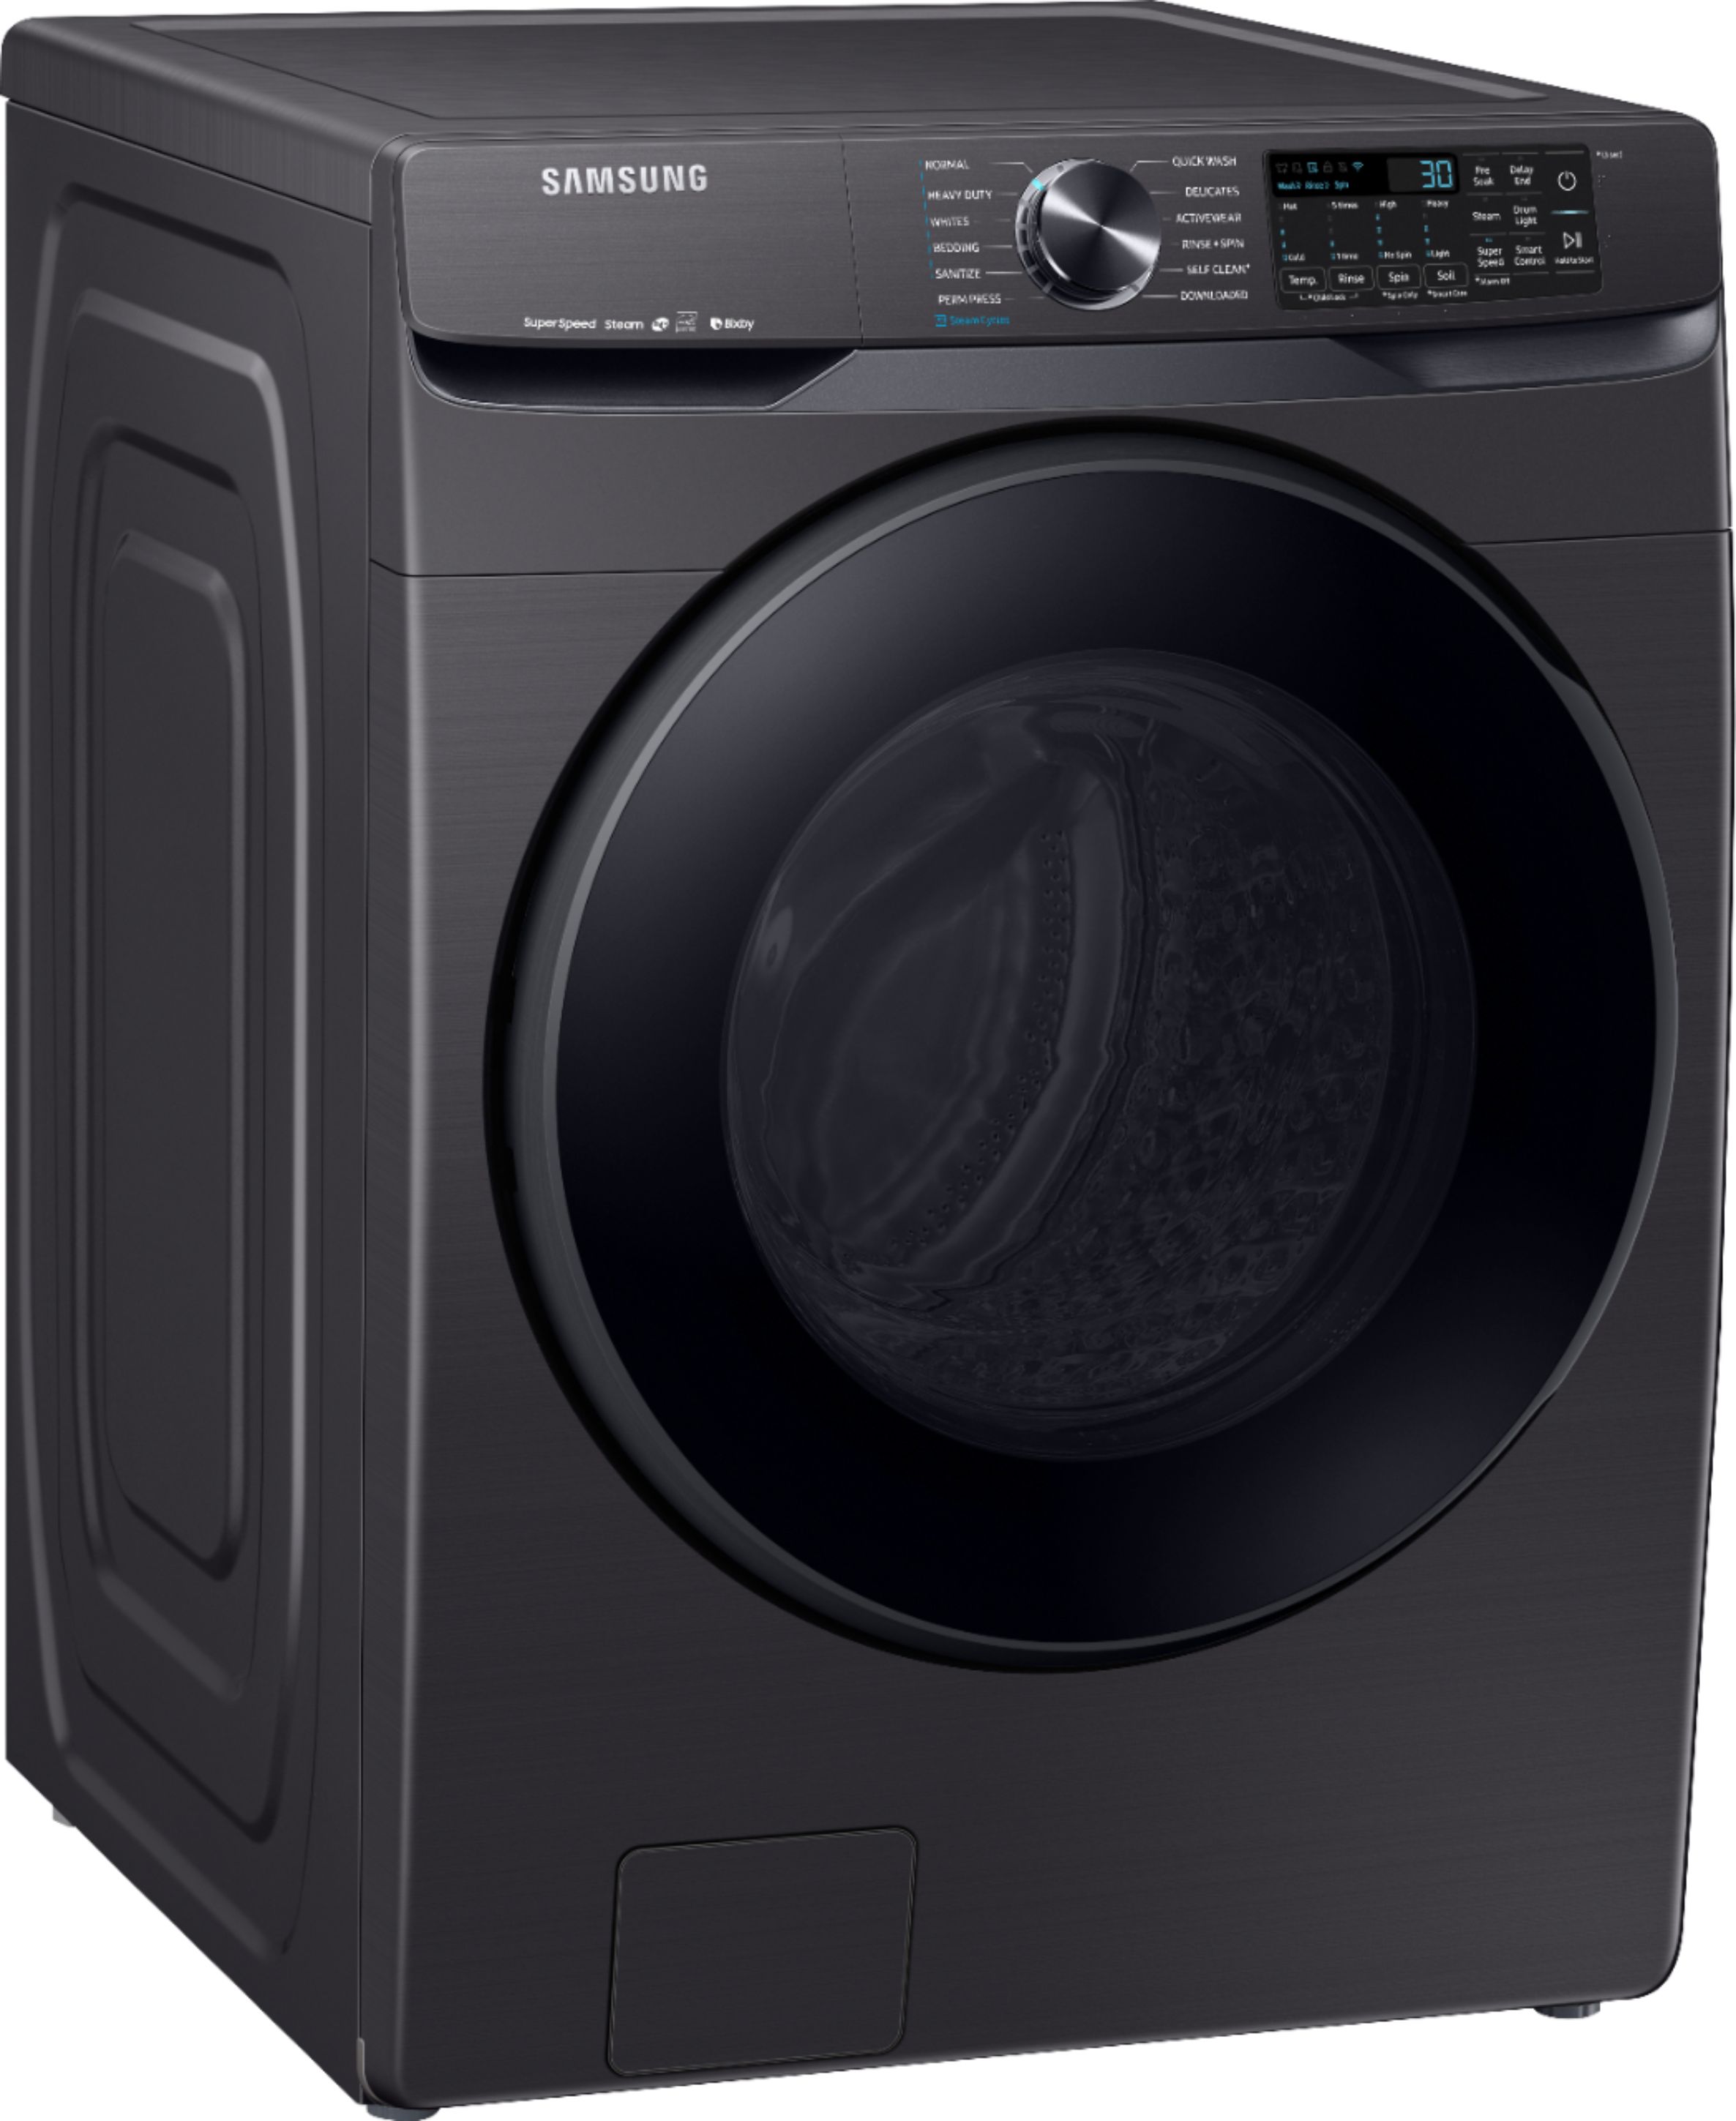 Angle View: Whirlpool - 2.3 Cu. Ft. High Efficiency Stackable Front Load Washer with Detergent Dosing Aid - White